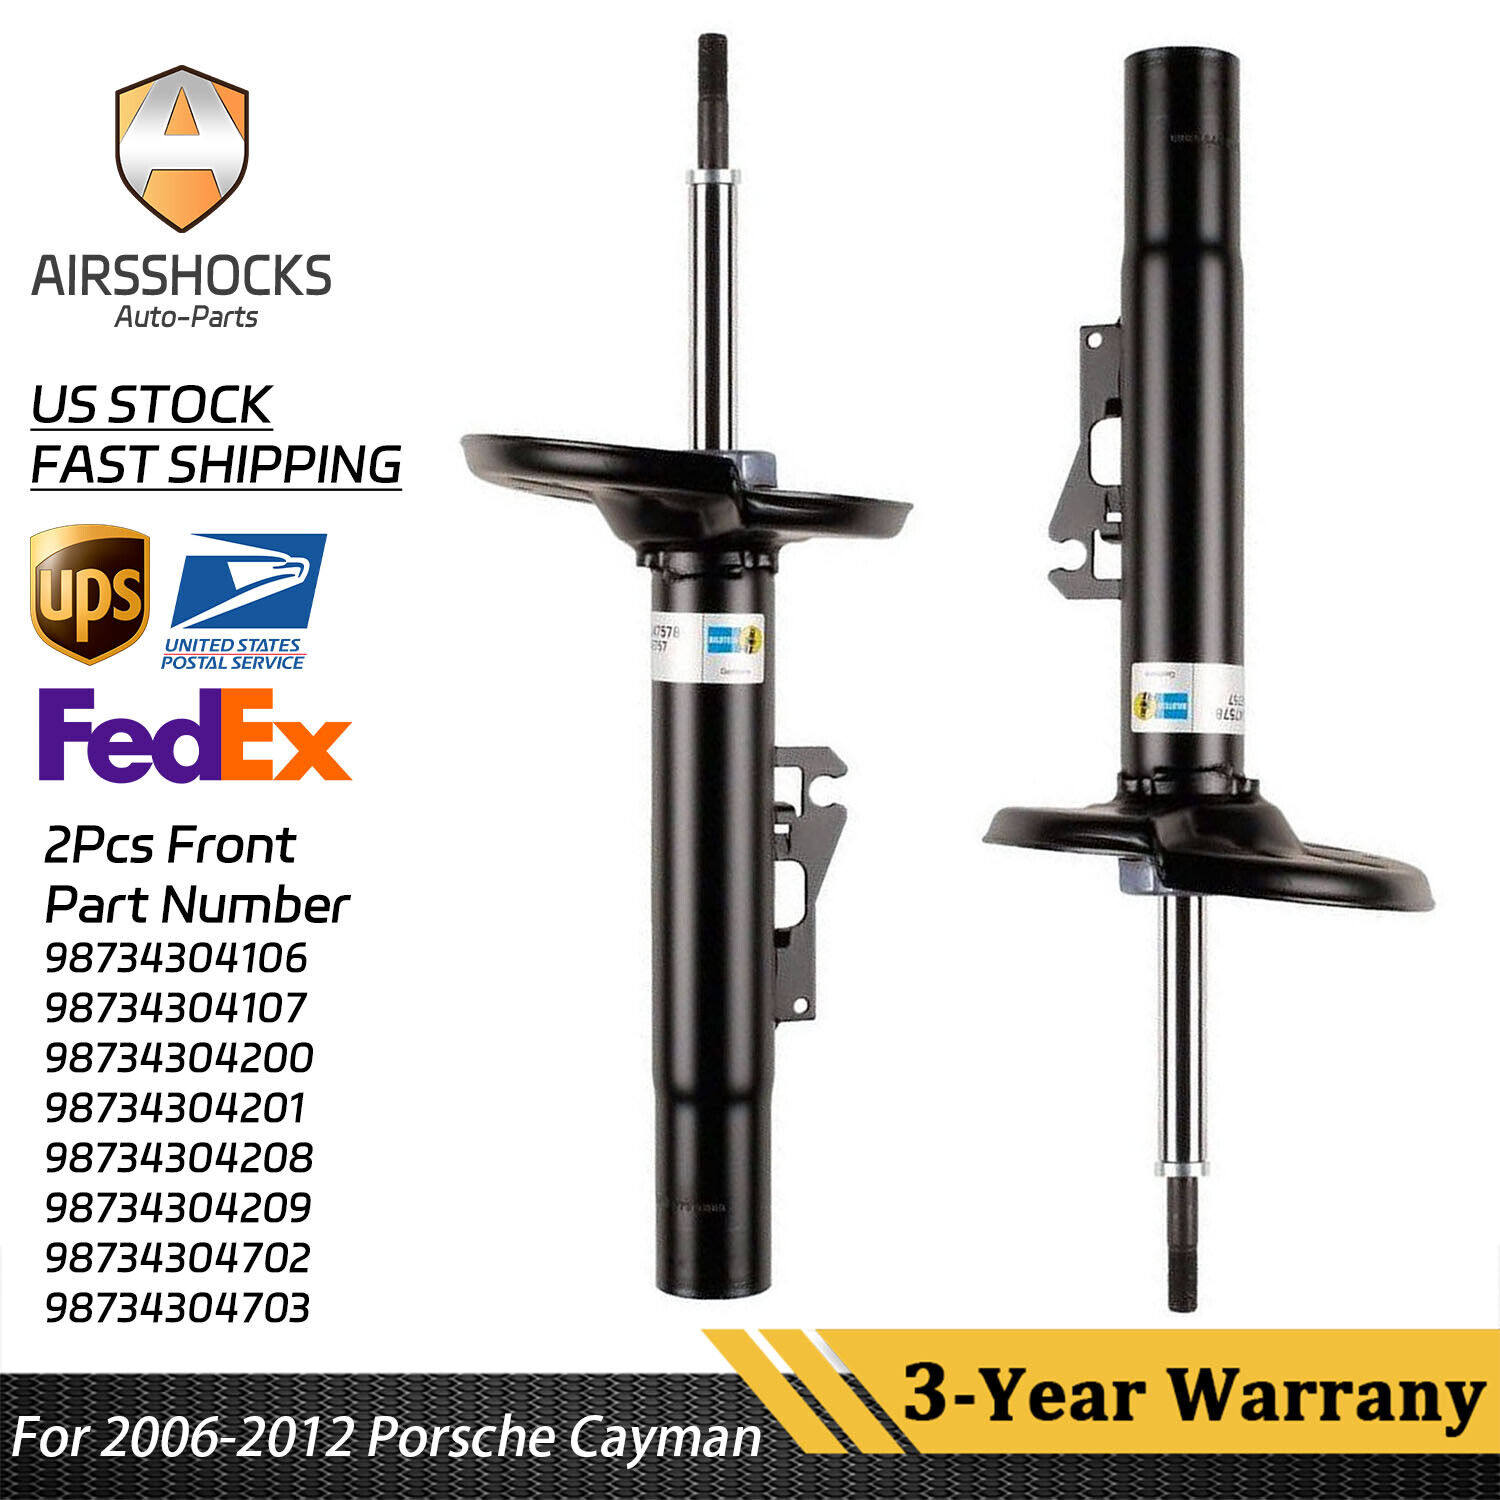 2x Front Shock Absorber W/o PASM For 2006-2012 Porsche Cayman (987) #98734304106